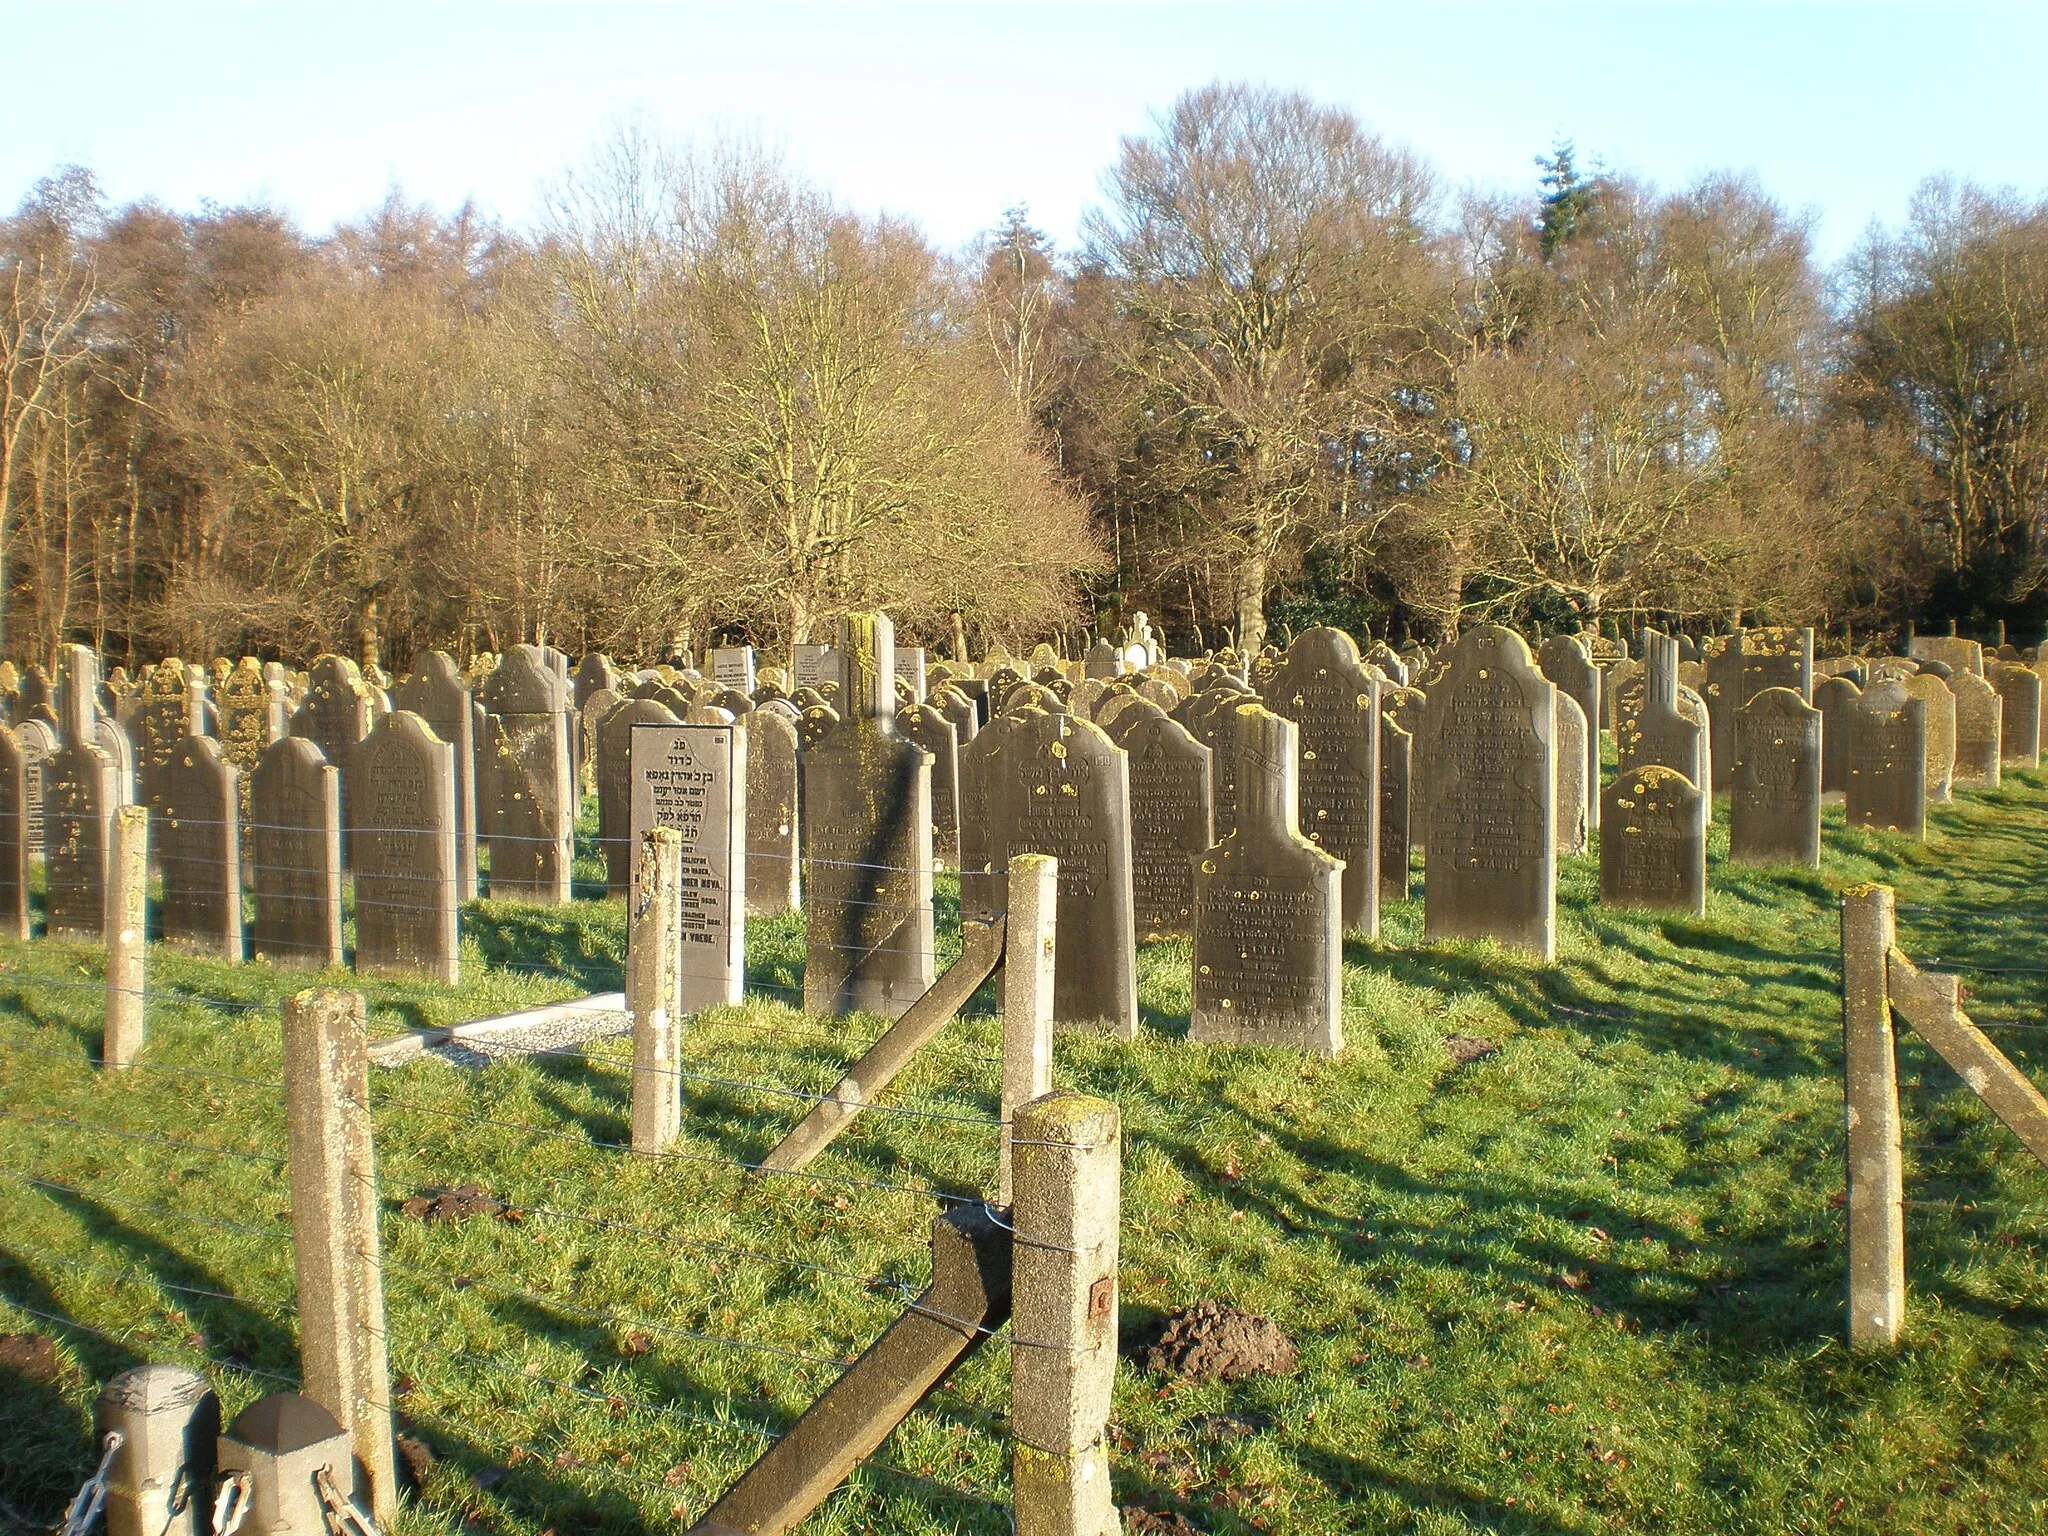 Photo showing: Headstones at the Jewish cemetery in Muiderberg.